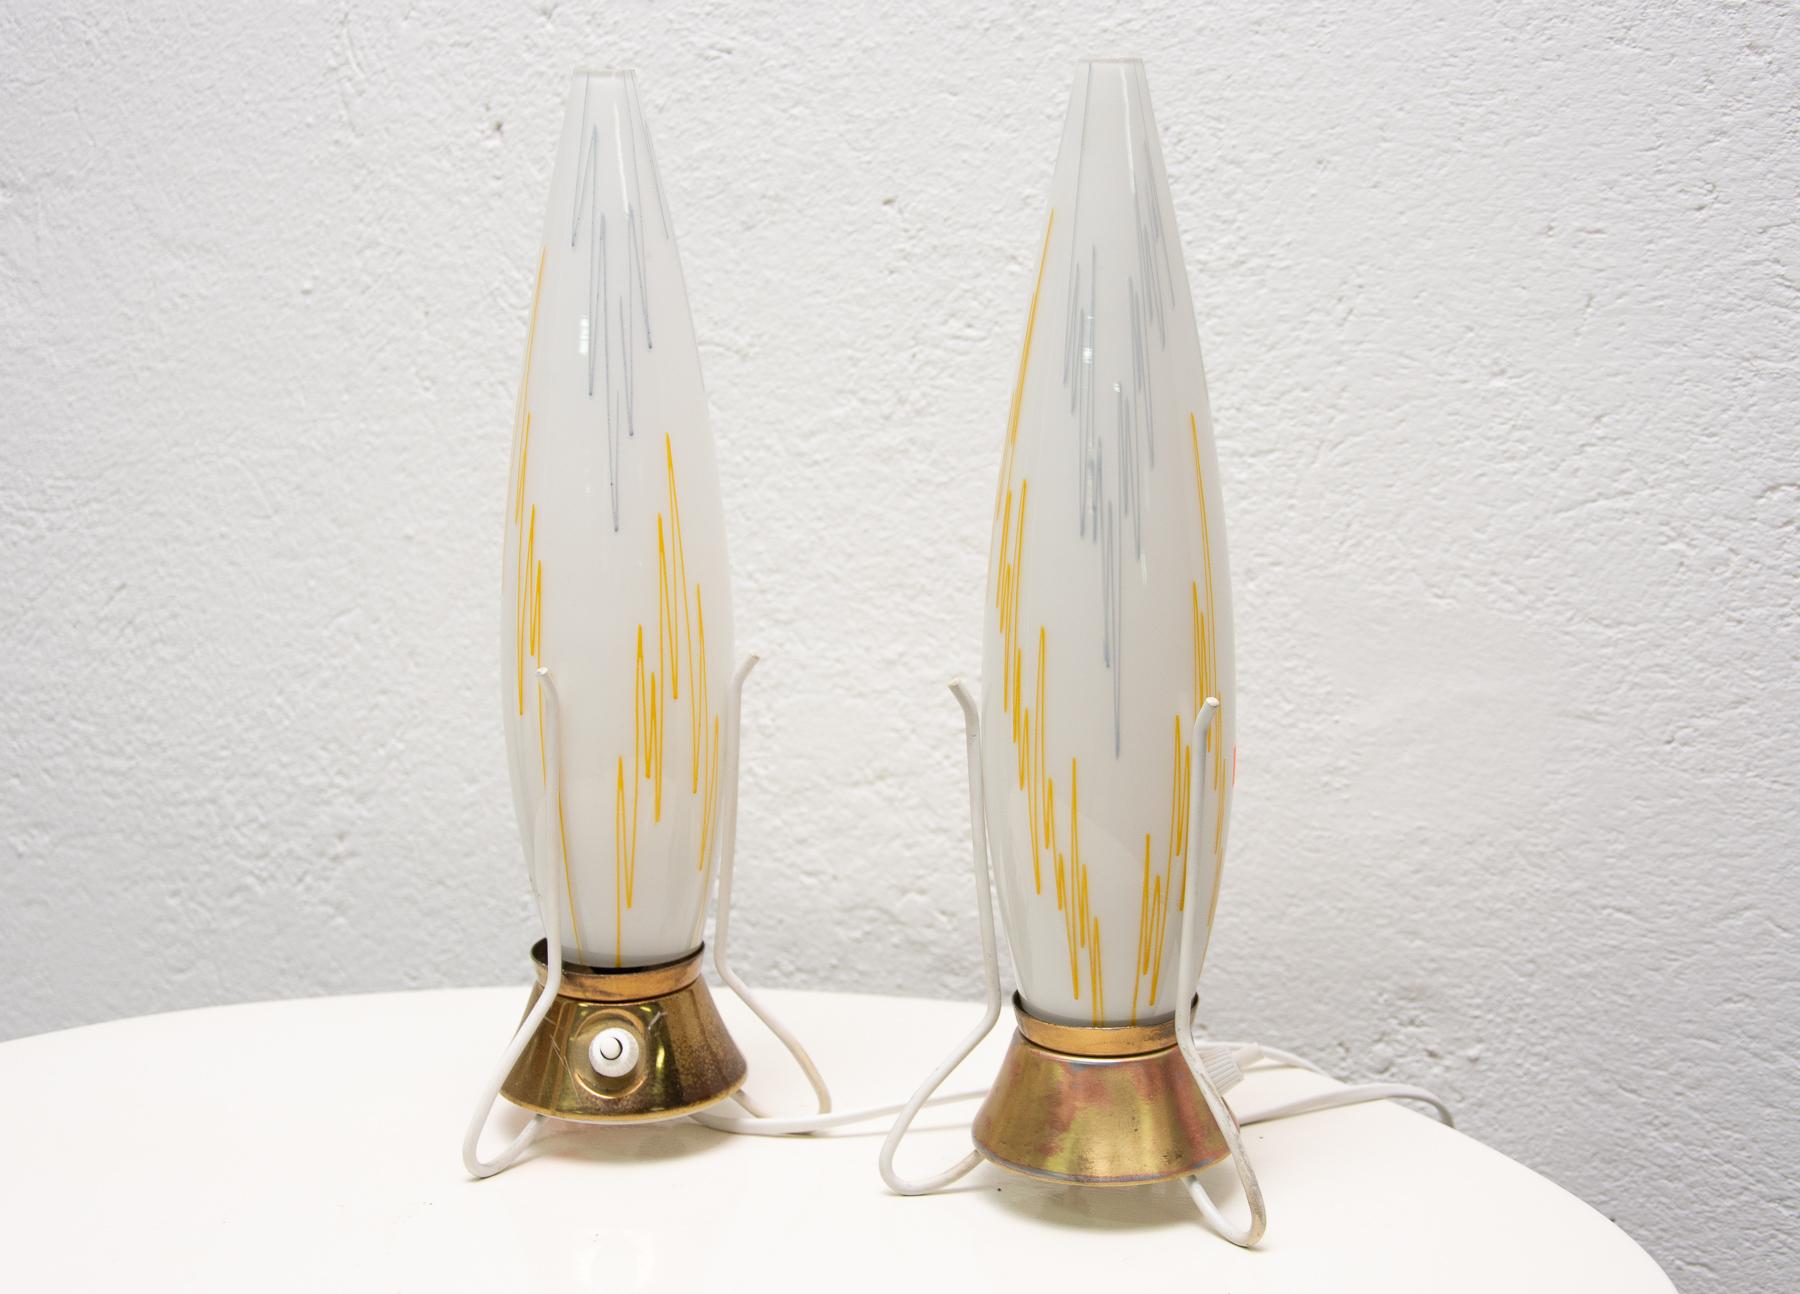 20th Century Pair of Midcentury Rocket Table Lamps, 1950s, Czechoslovakia For Sale